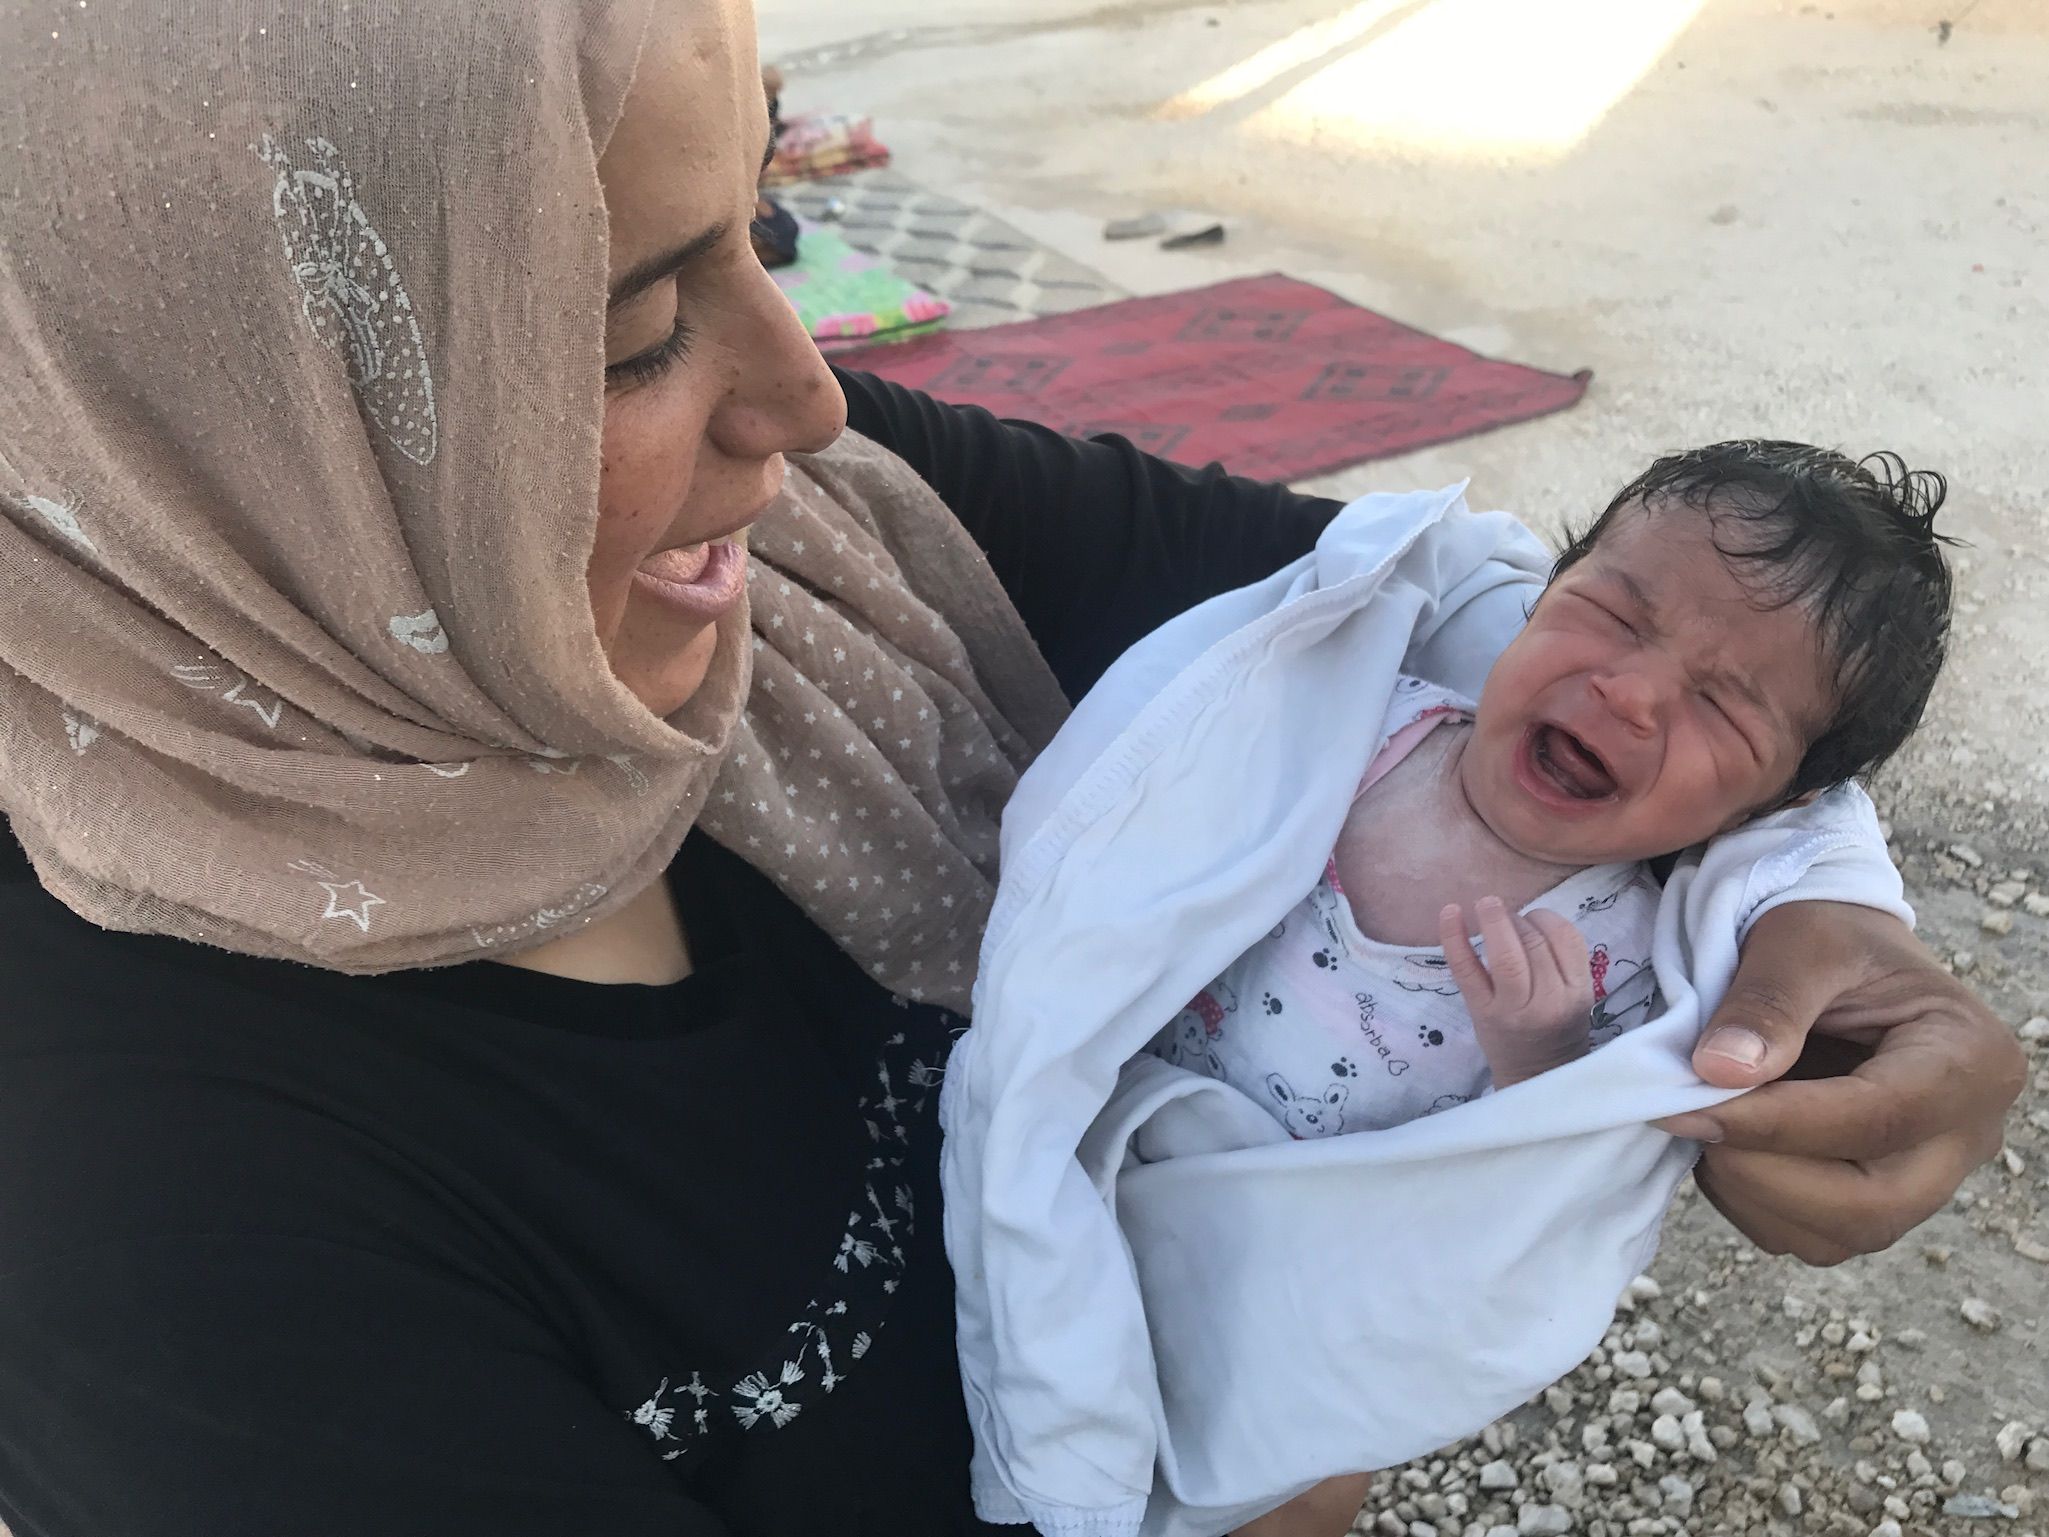 Batoul led her toddler and her husband out of Raqqa while eight-months pregnant. Now, she is focused on her baby’s future while living at Ayn Issa camp for the displaced. Image by Jon Gerberg/PBS NewsHour. Syria, 2017.